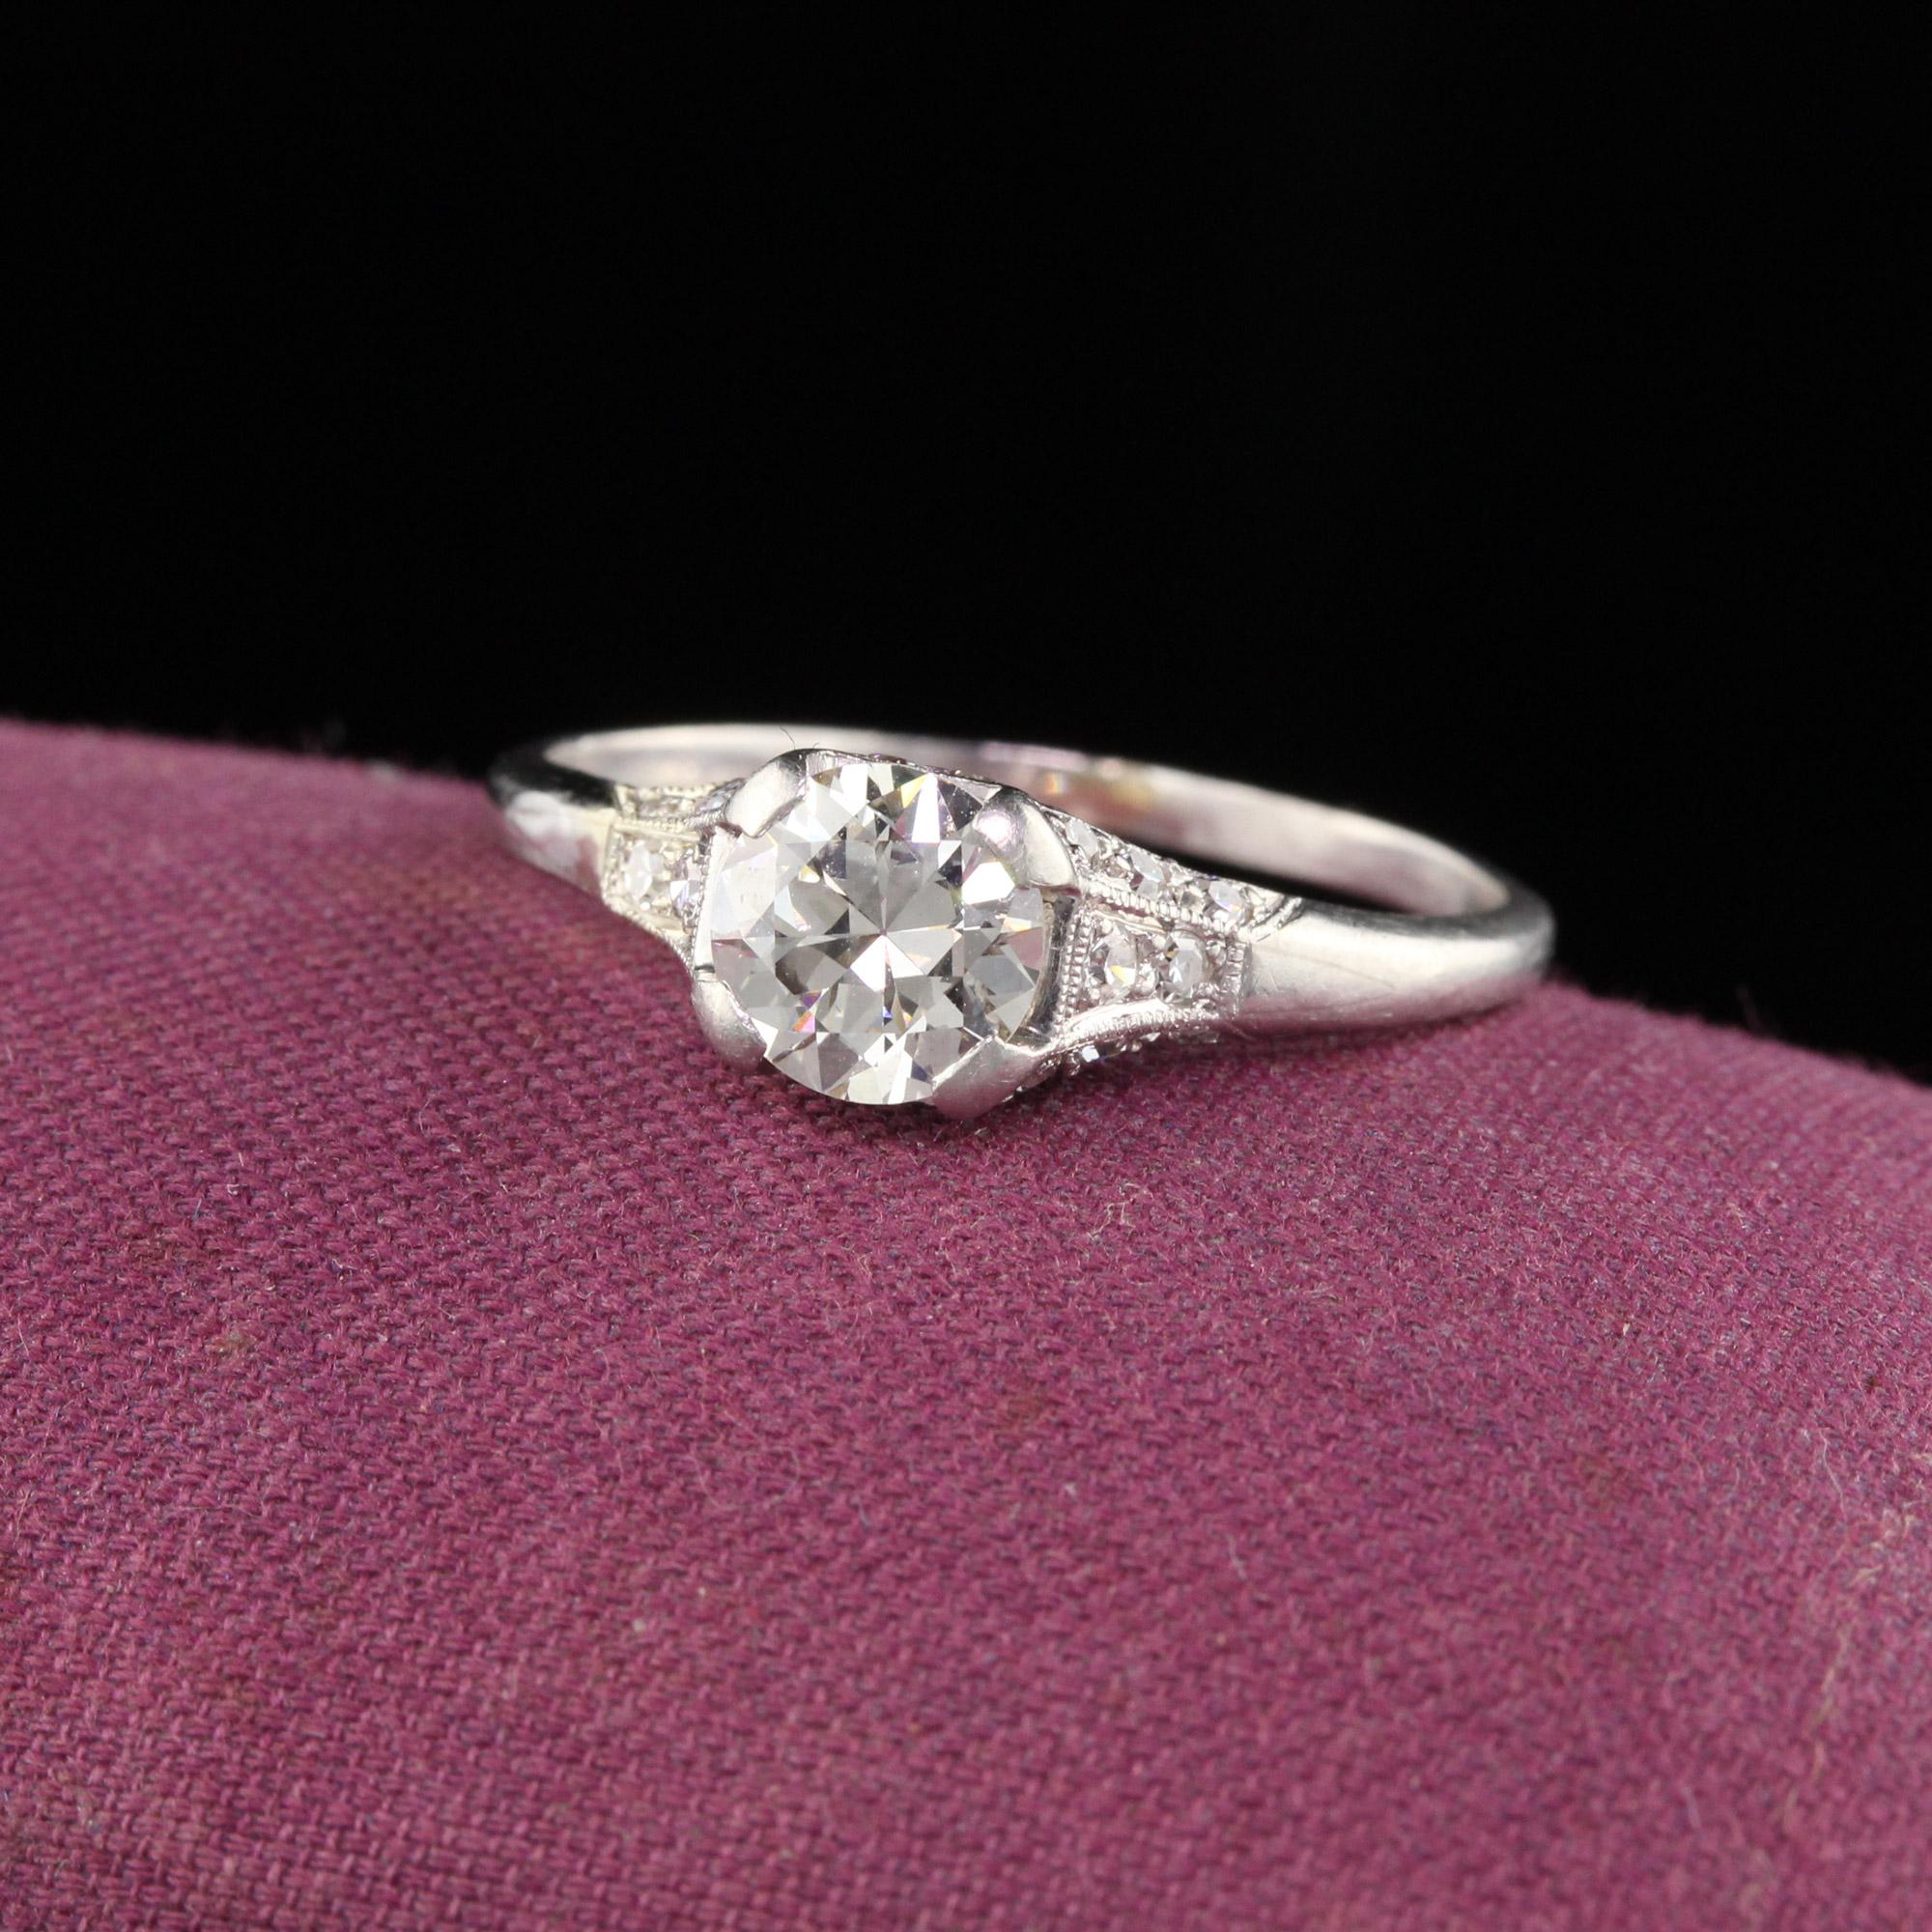 Simple & classic art deco engagement ring in platinum featuring an old european cut diamond in the center with 2 single cut diamonds on either side and on the gallery.

#R0402

Metal: Platinum

Weight: 2.7 Grams

Center Diamond Weight: Approximately